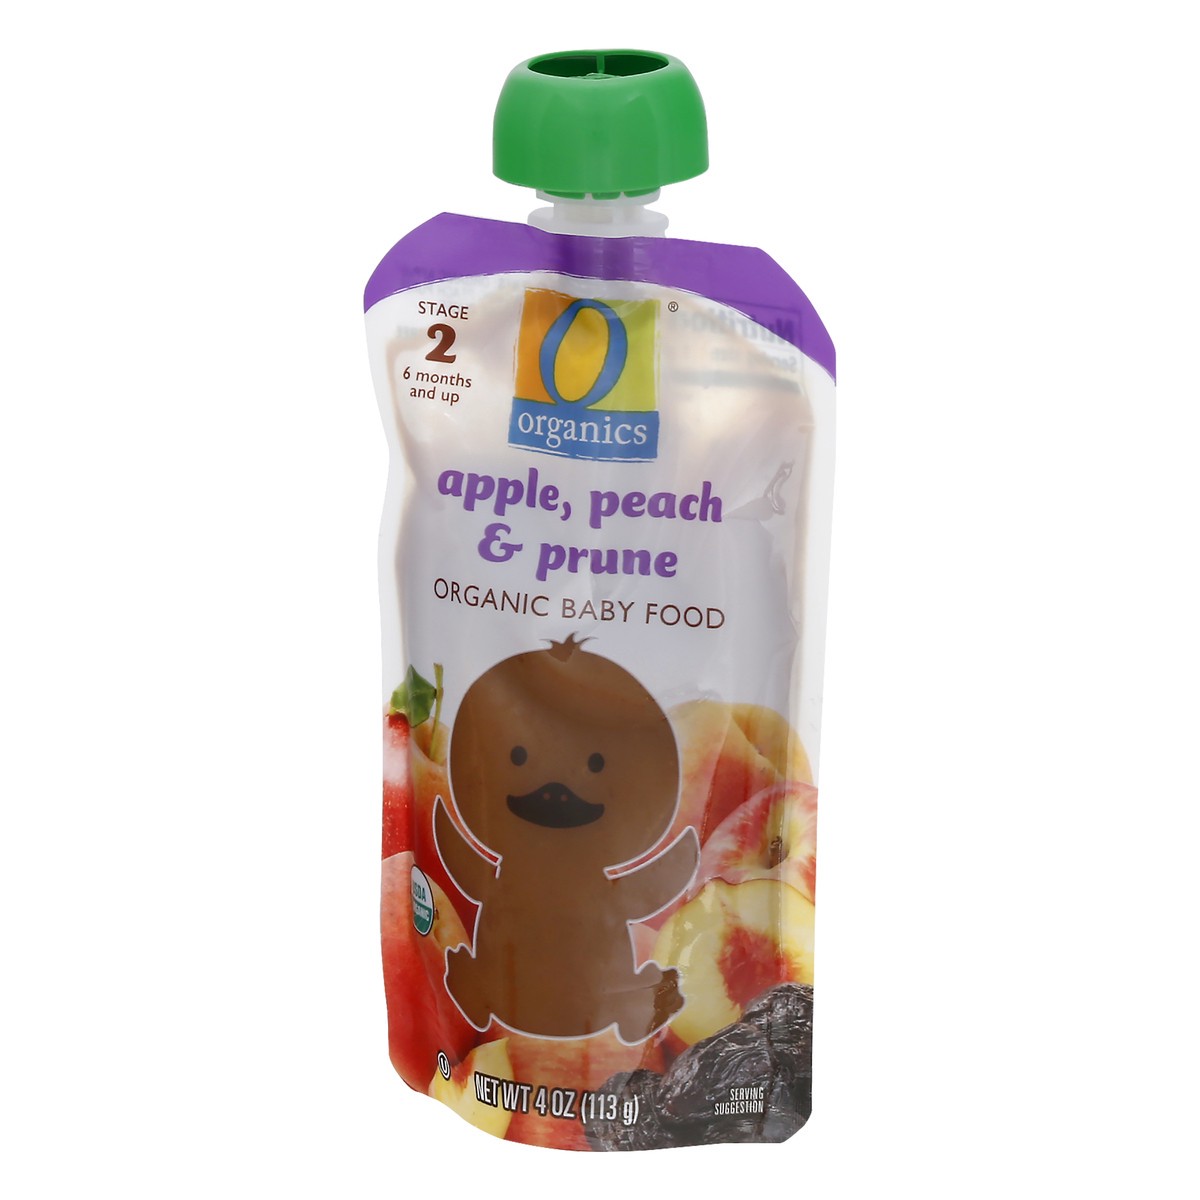 slide 3 of 9, Organics Stage 2 (6 Months and Up) Organic Apple, Peach & Prune Baby Food 4.0 oz, 4 oz